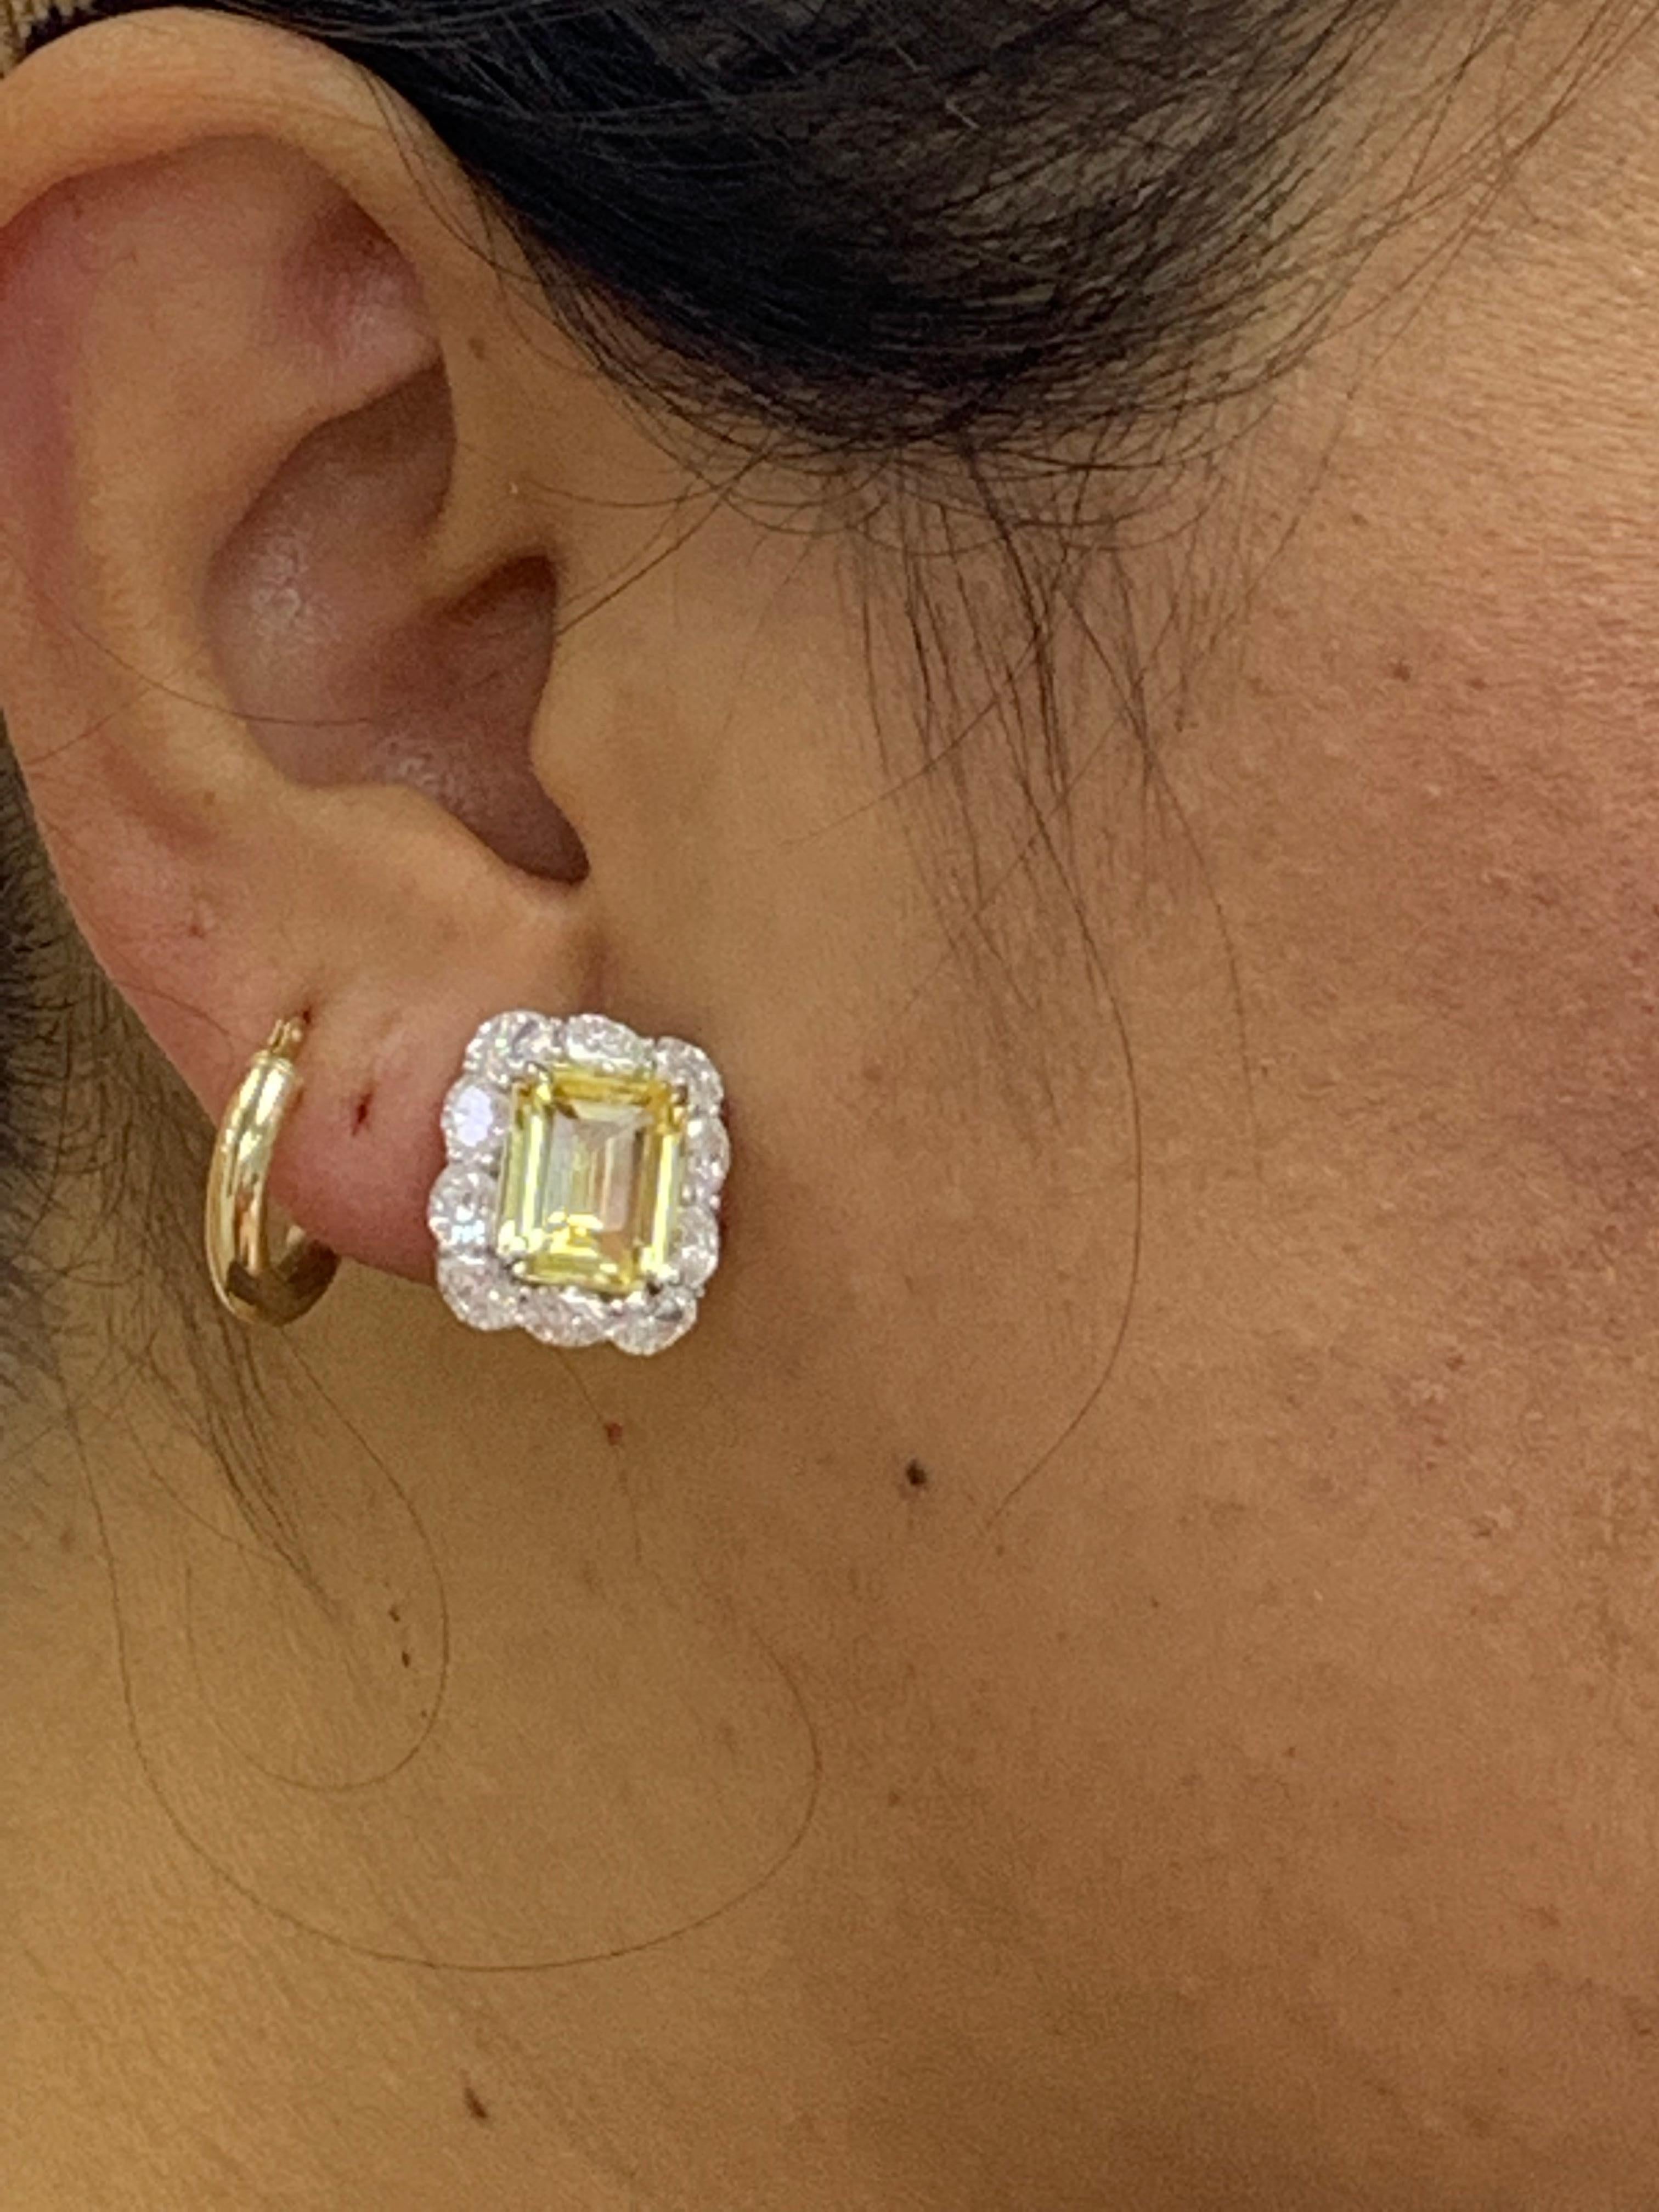 10.09 Carat Emerald Cut Yellow Sapphire Diamond Halo Earring in 18K White Gold For Sale 9